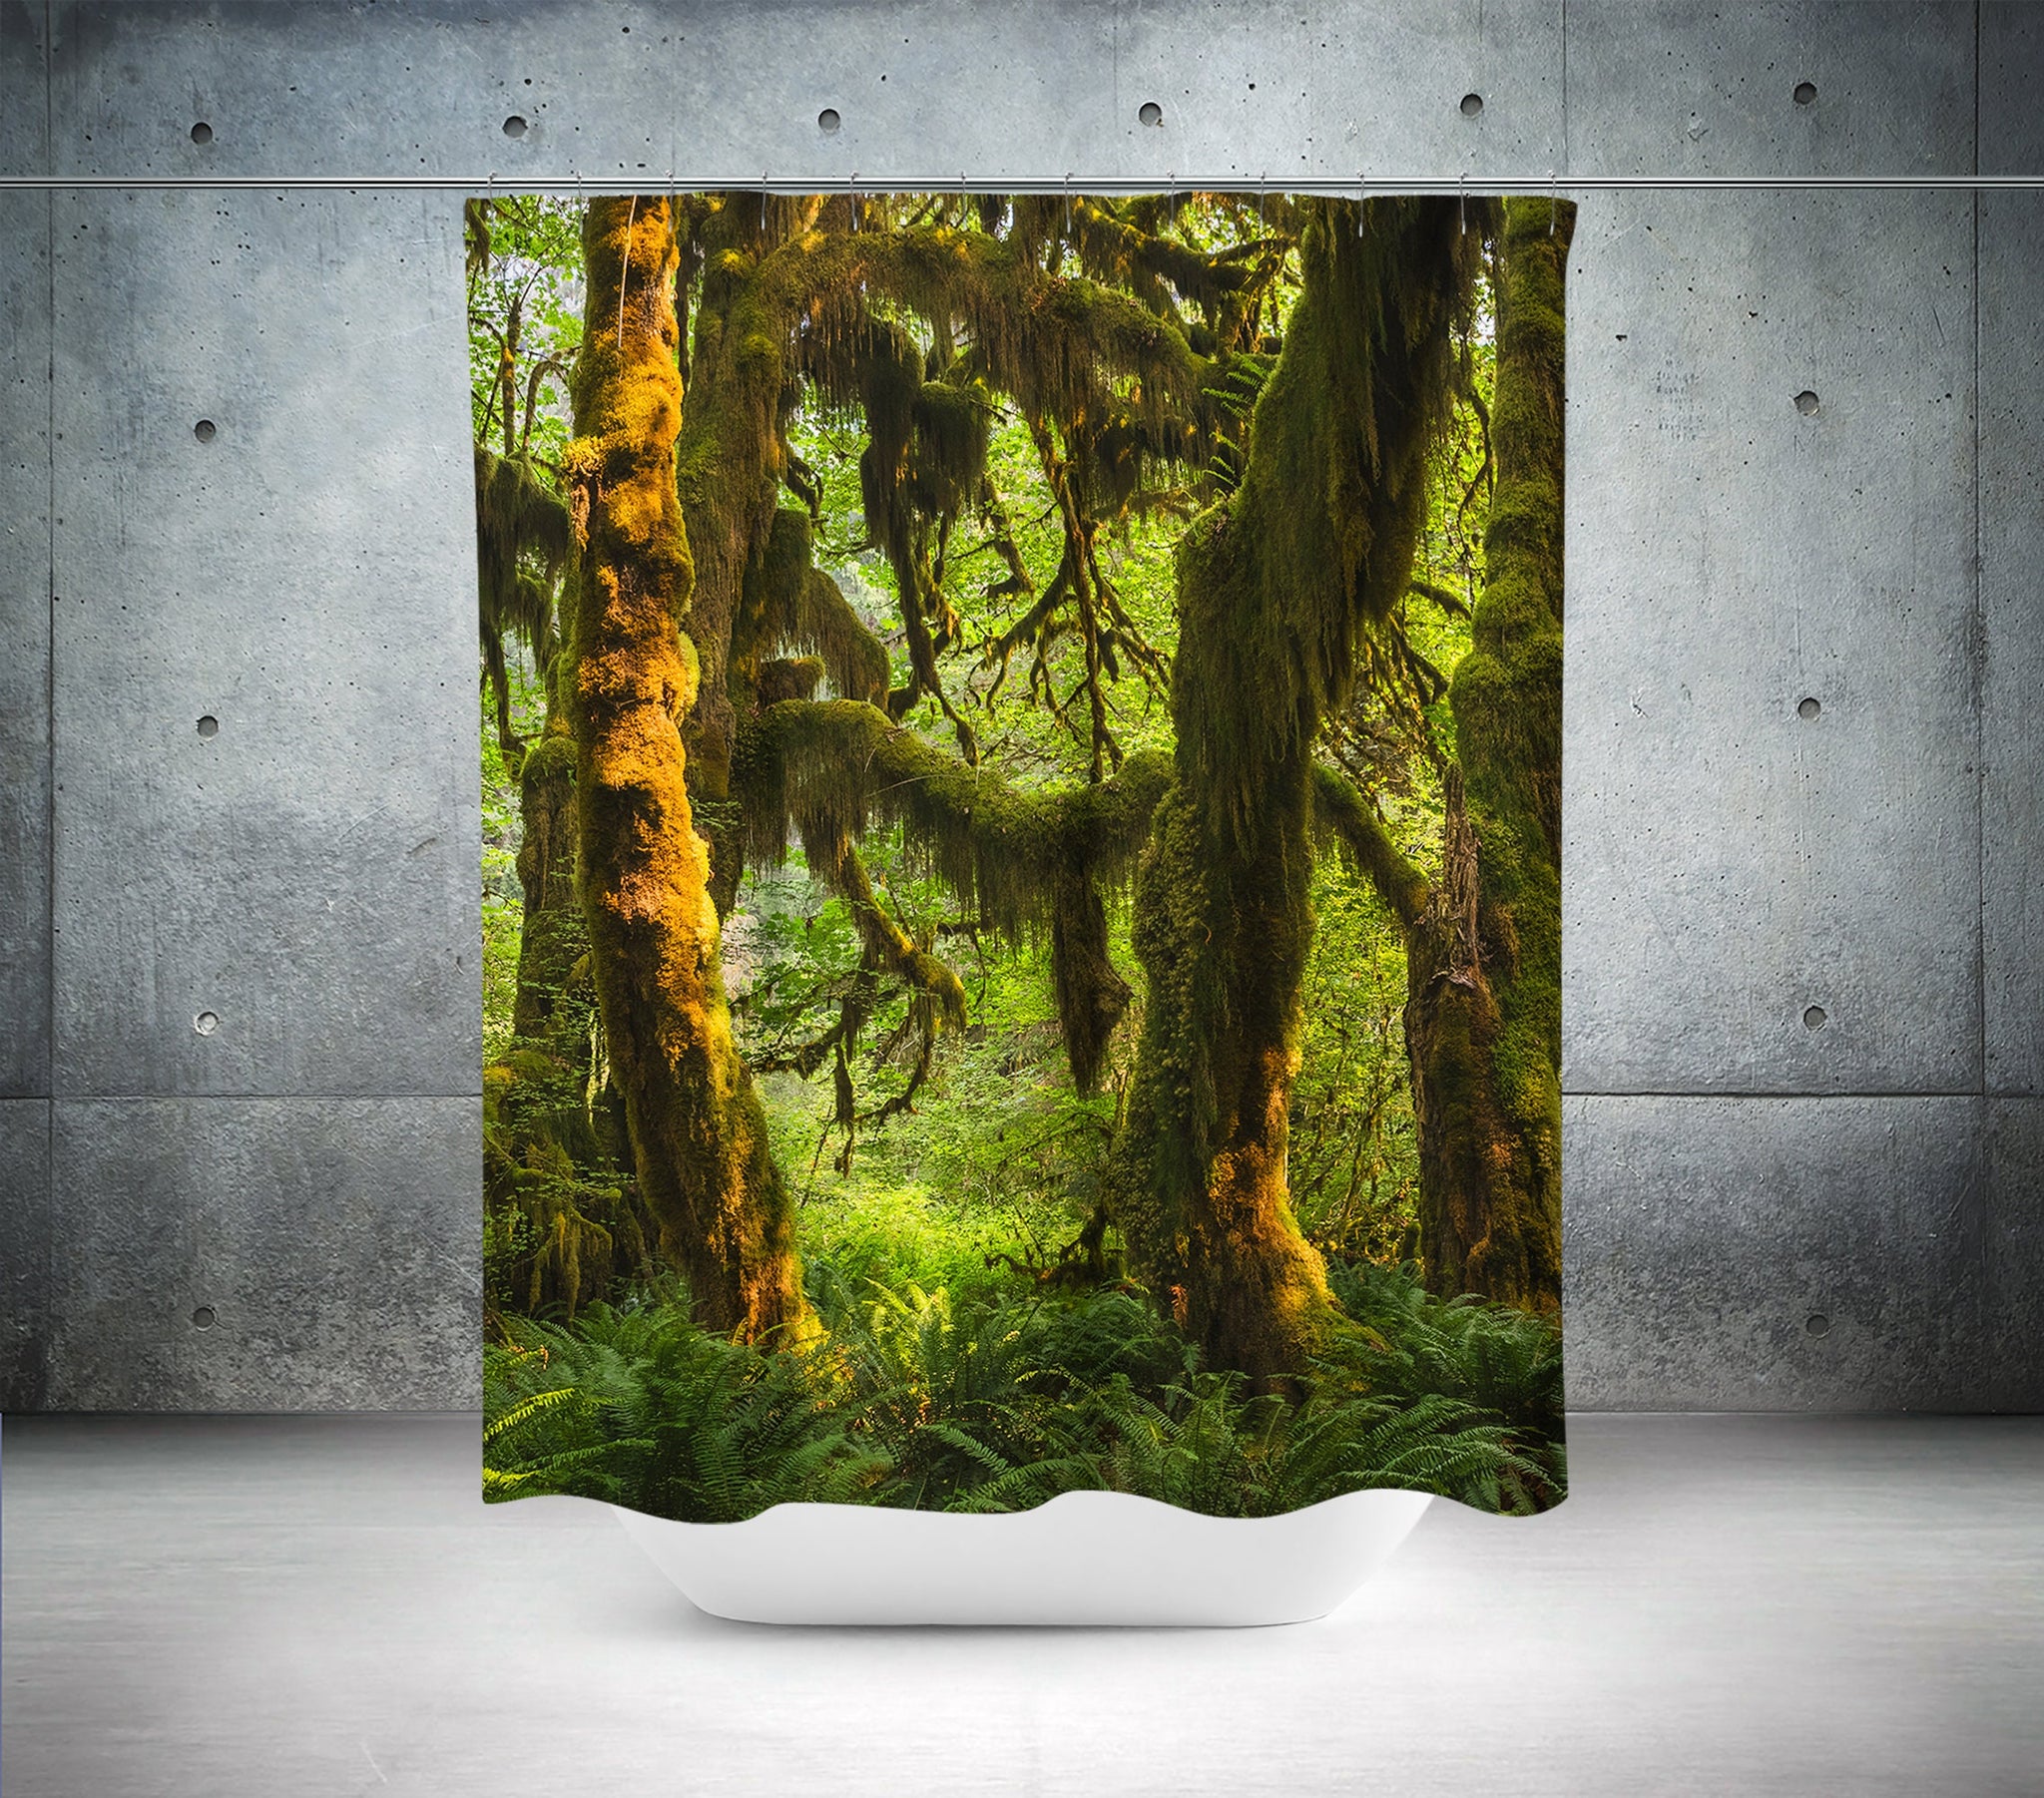 Mossy Forest Shower Curtain 71x74 inch Olympic National Park